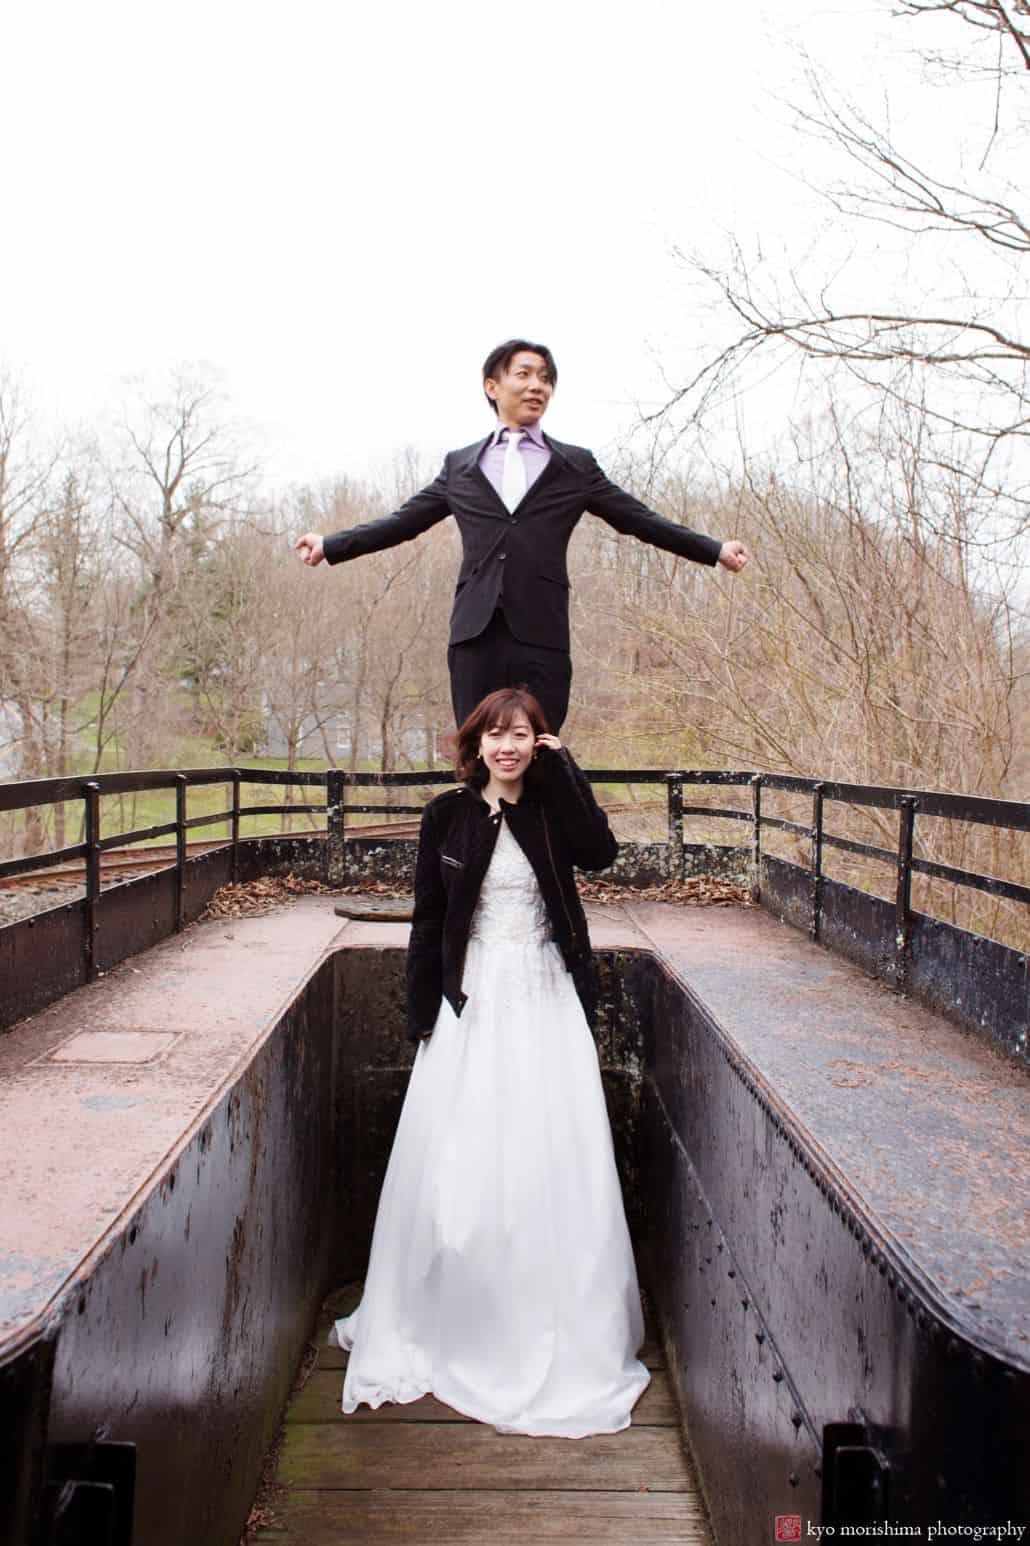 Light-hearted portrait session of a couple on an outdoor location, the groom is standing in a bench behind the bride and he's spreading his hands, while the bride is smiling wearing her wedding dress and a black jacket, photographed by wedding photographer in central NJ Kyo Morishima.